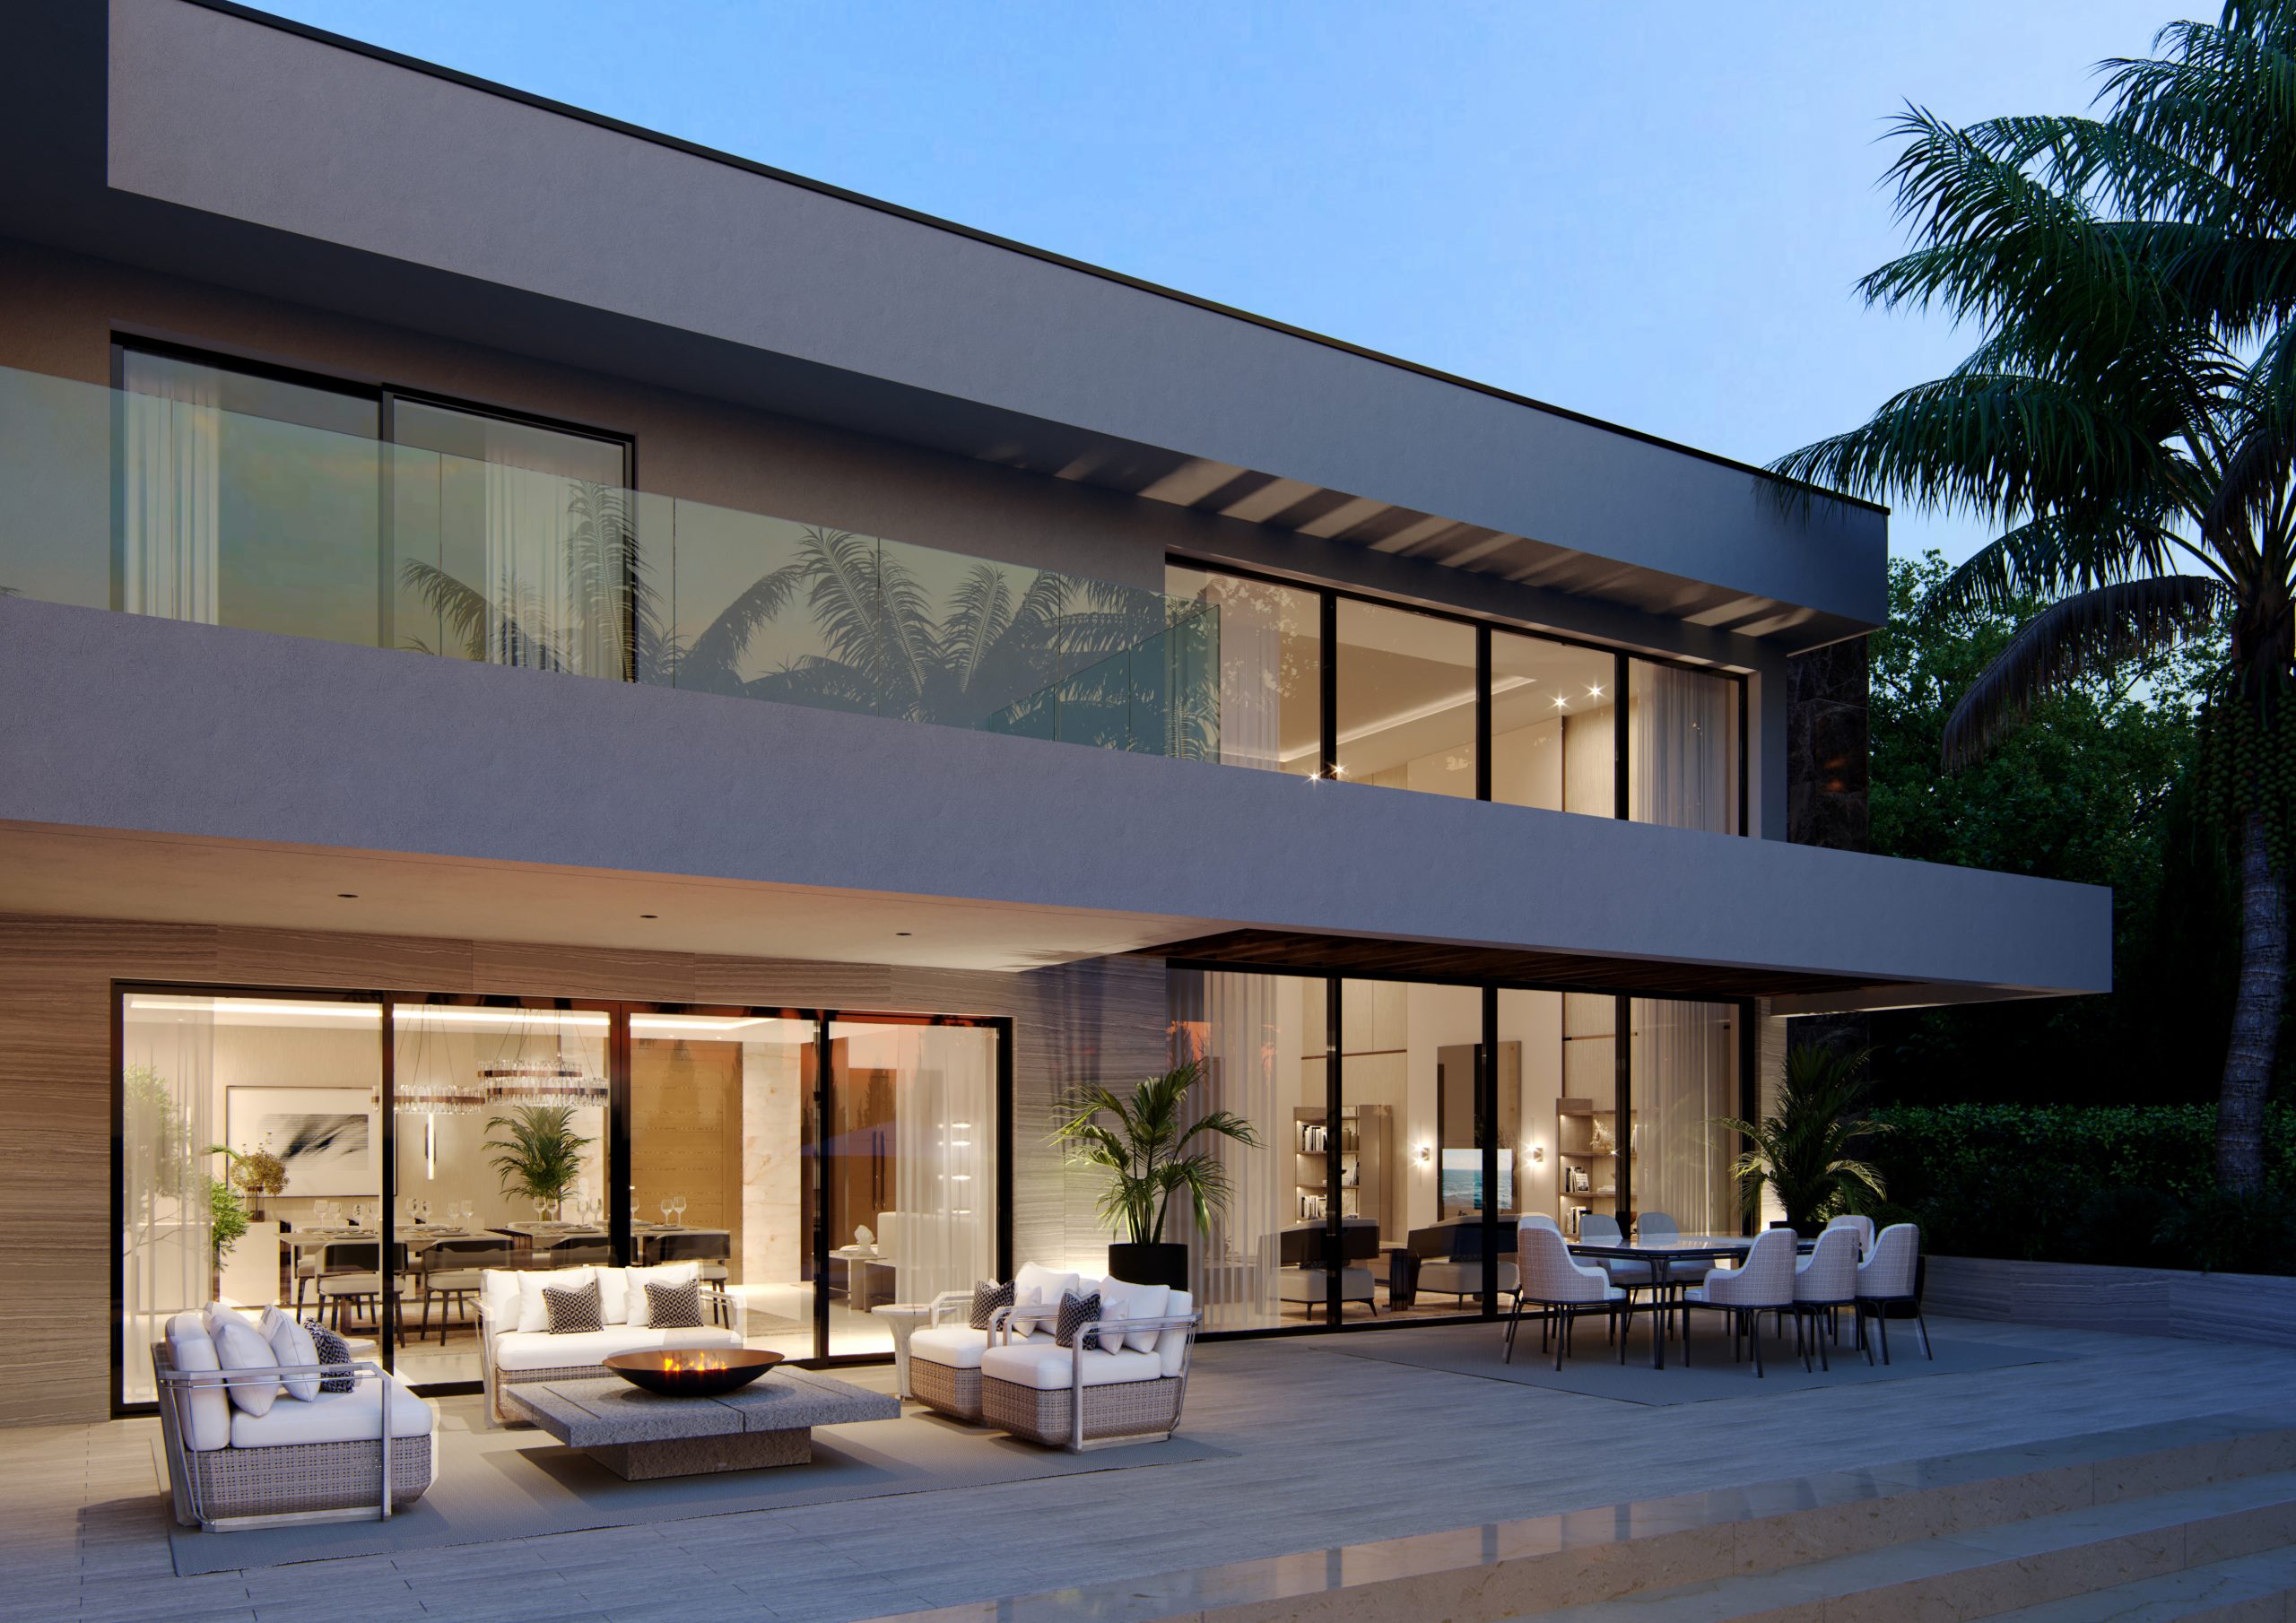 Sierra Blanca Modern Villa In Marbella With A Luxe Design To Live By!